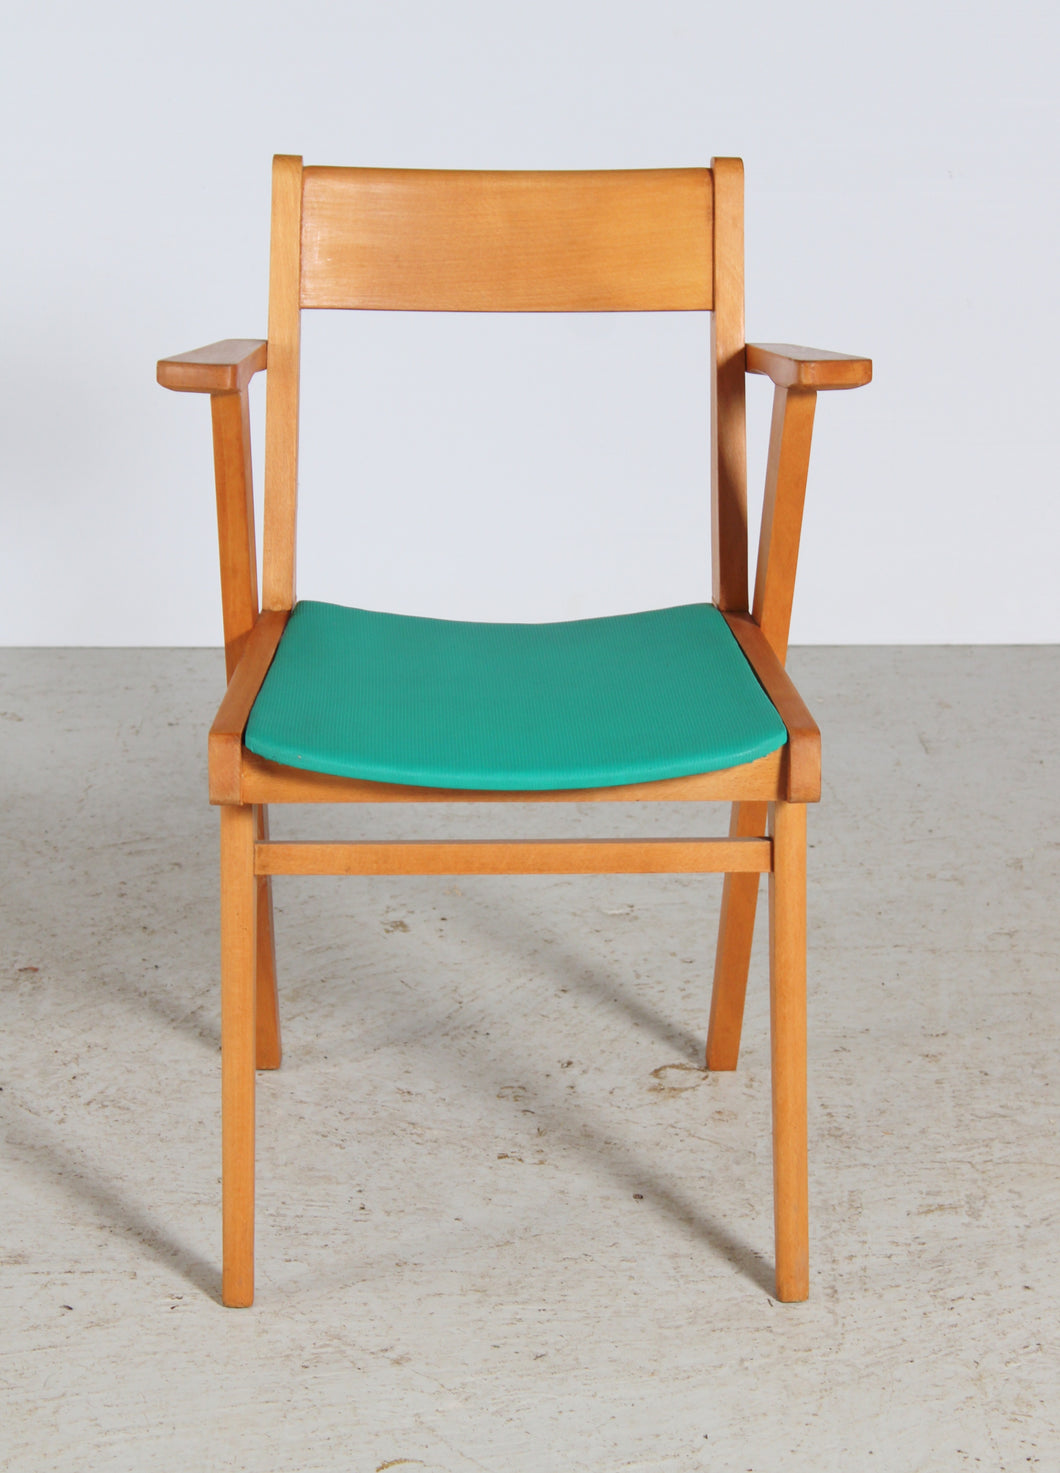 French Mid Century beech chair with Green Vinyl Seat. c. 1960s